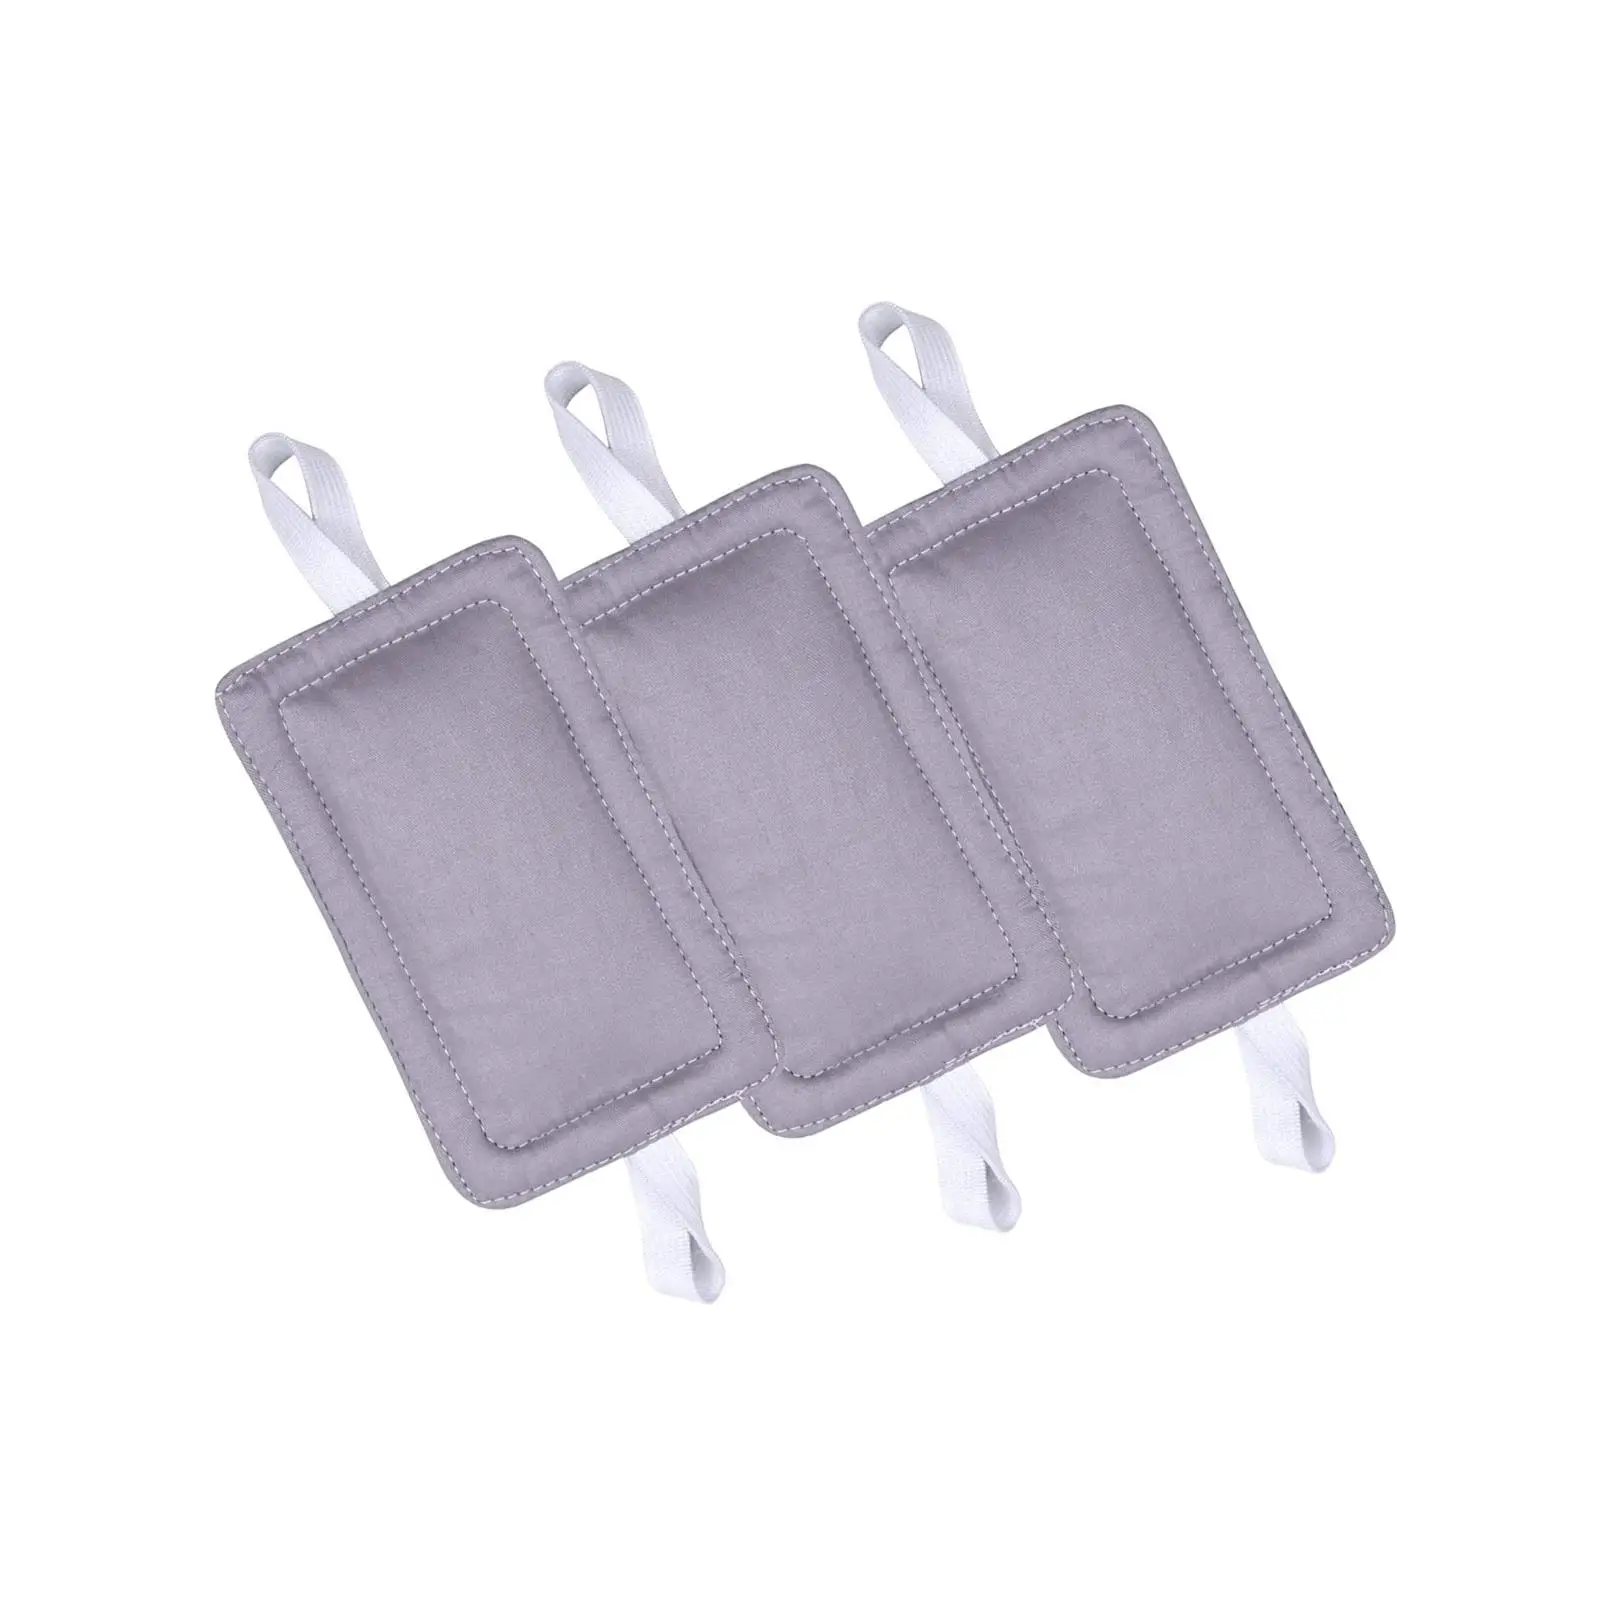 3Pcs Closer Door Cushion with Elastic Straps Latch Covers Closer for Noise Reducing Bathroom Light Sleepers Dormitory